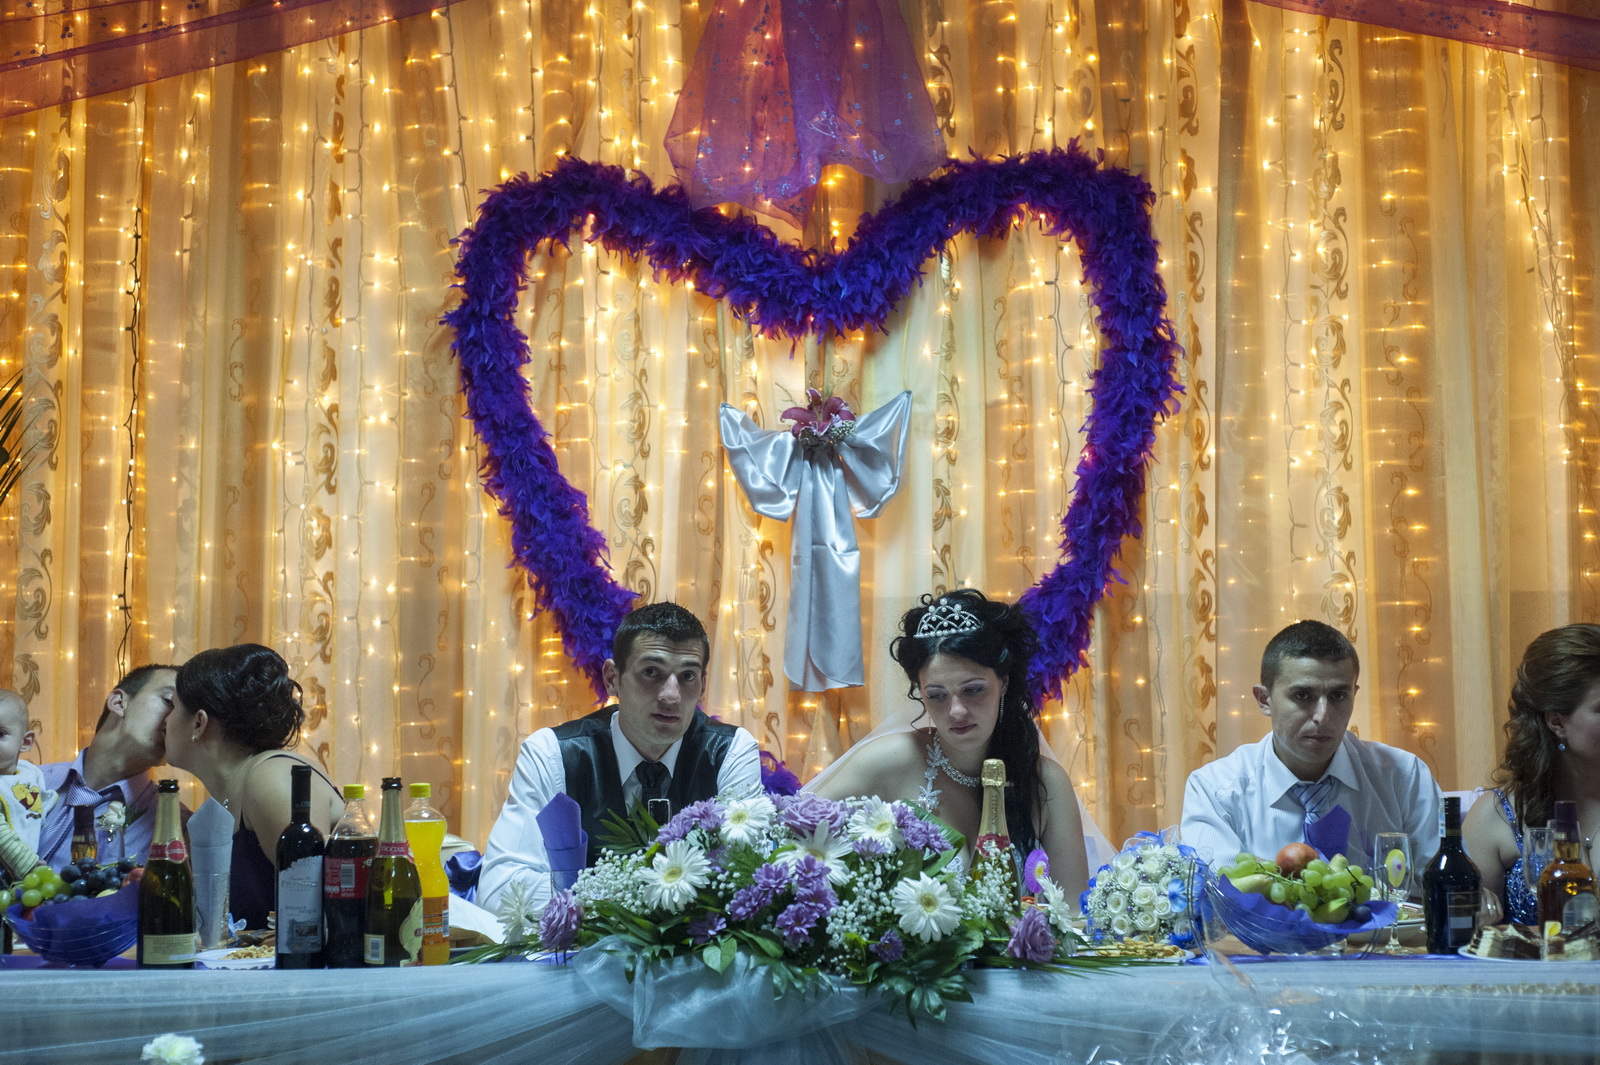 The wedding of Ionut and Maria Certeze, Oas county. Both work in Paris (Photo © Petrut Calinescu)